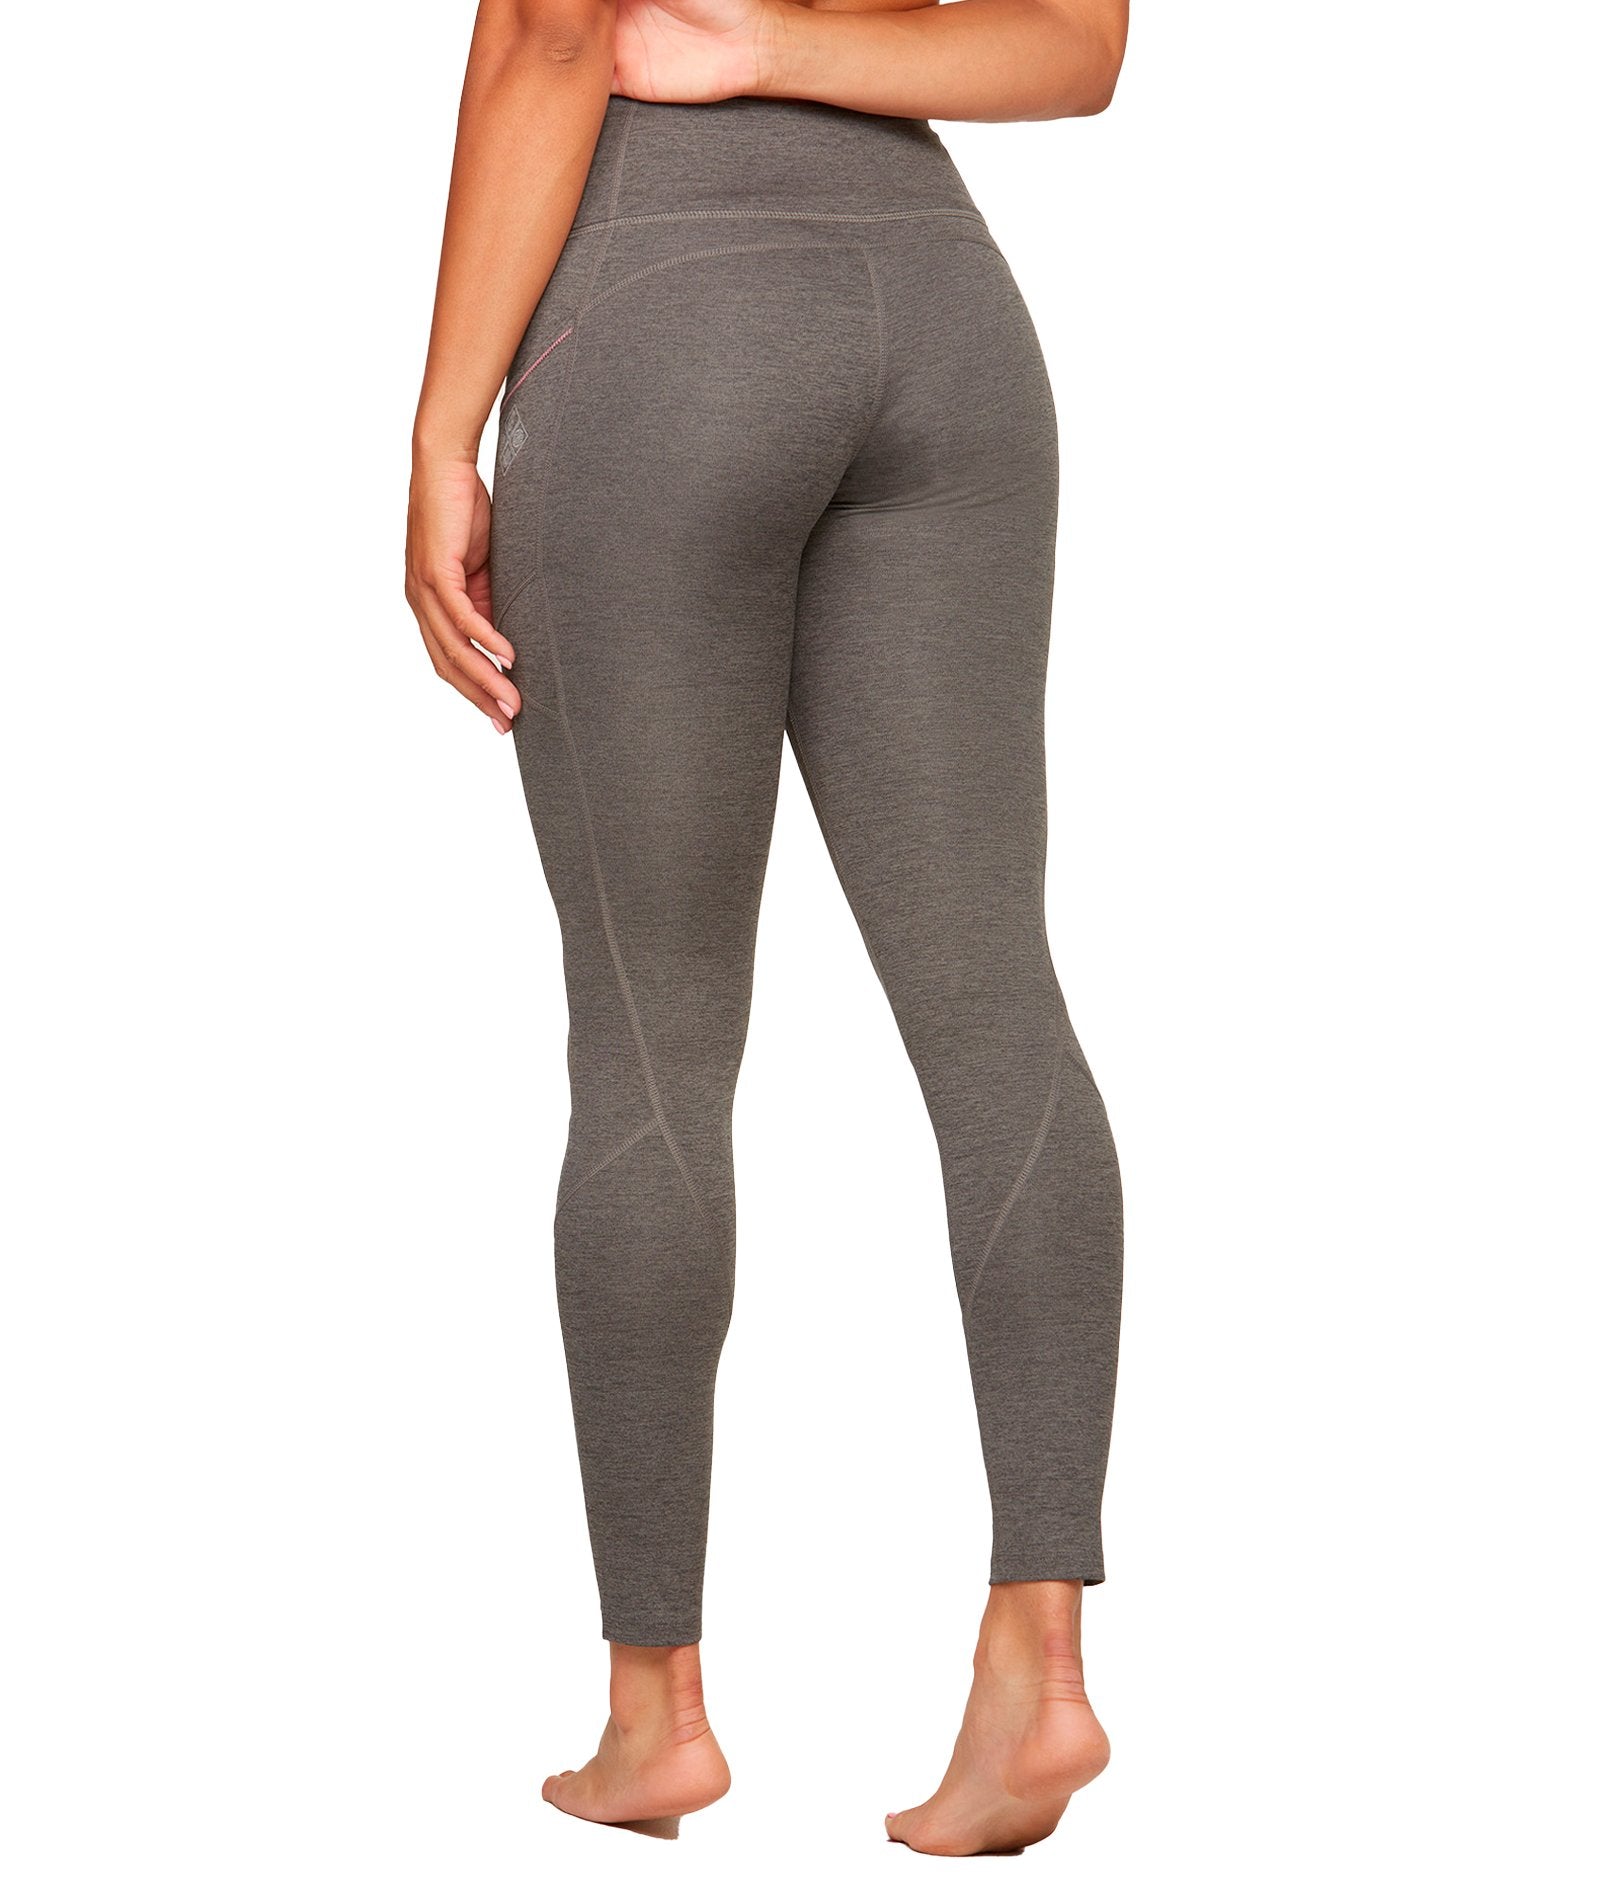 Women's Heather Charcoal Ablaze Recycled Legging